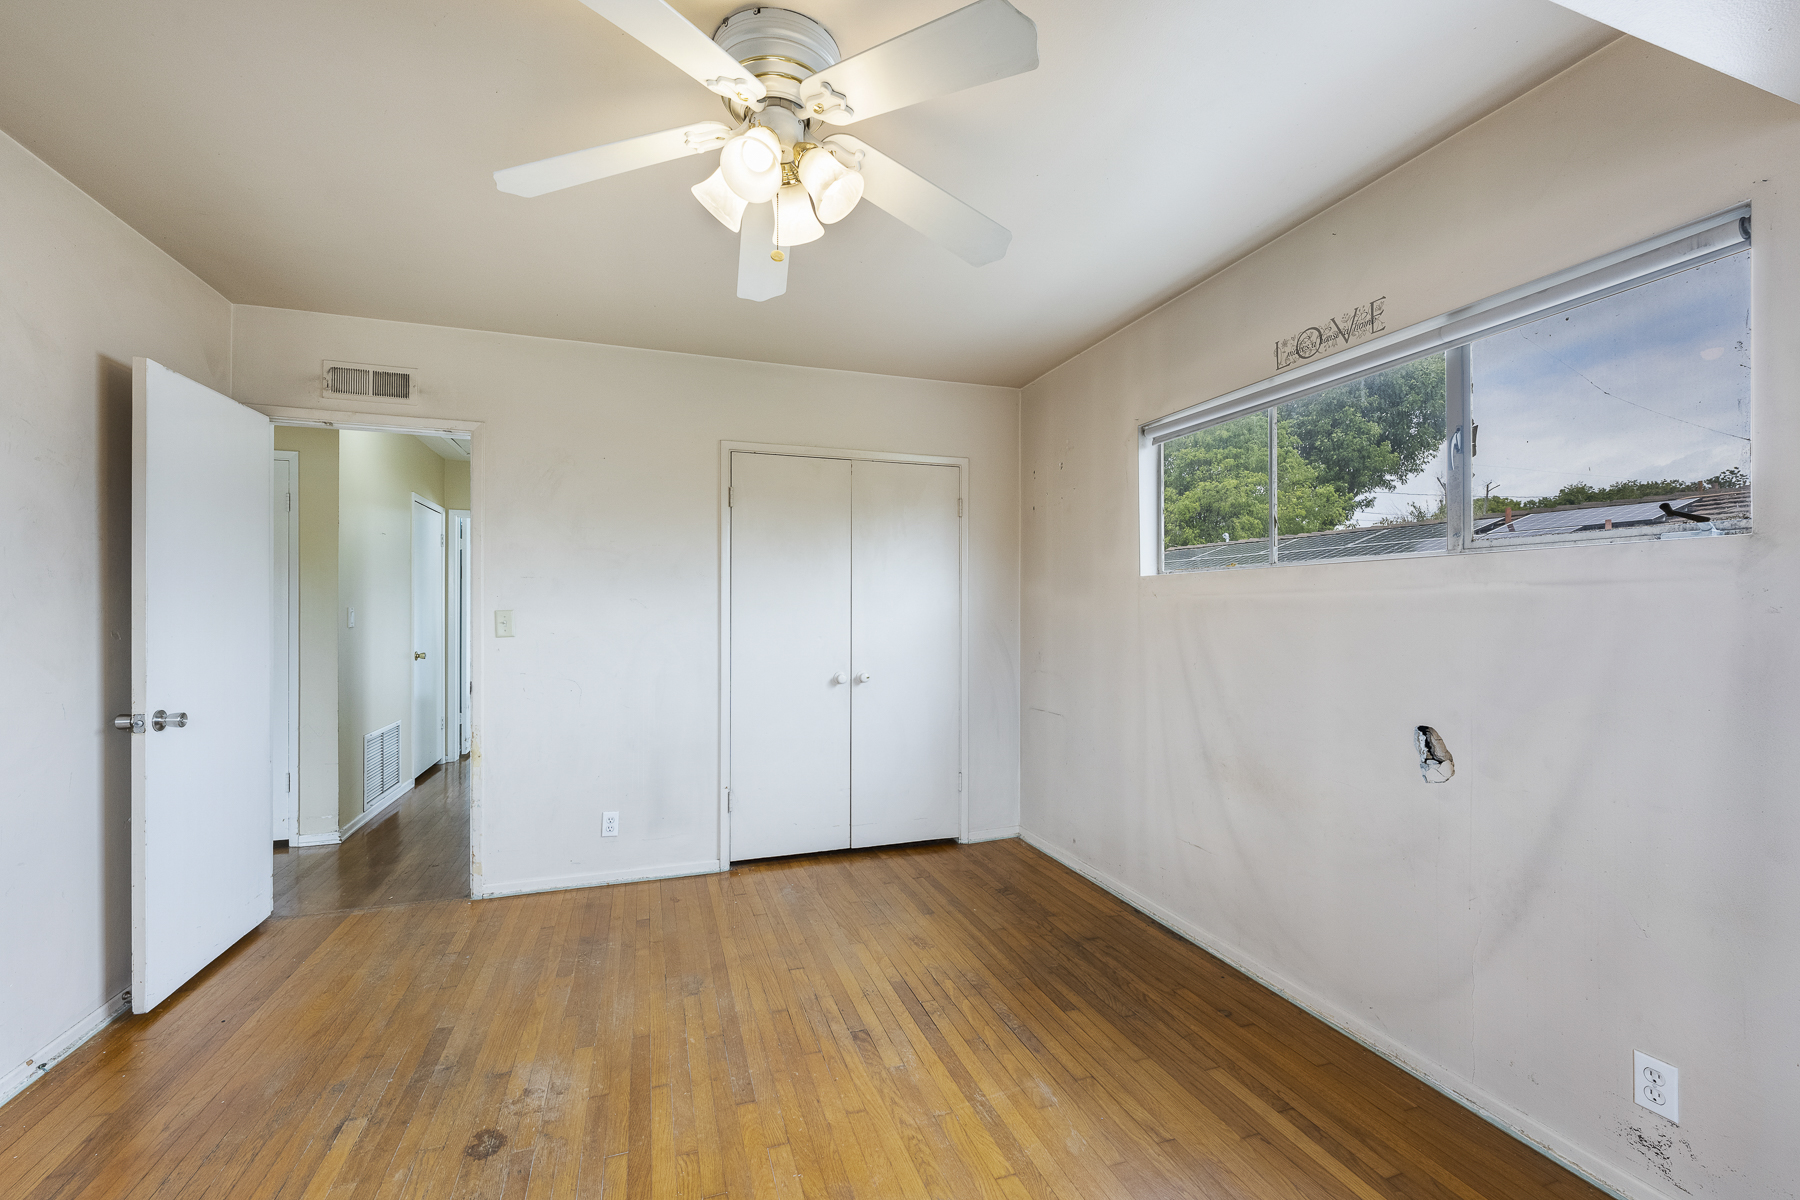 501 Dorothy Drive: Bedroom/office space with closet and window